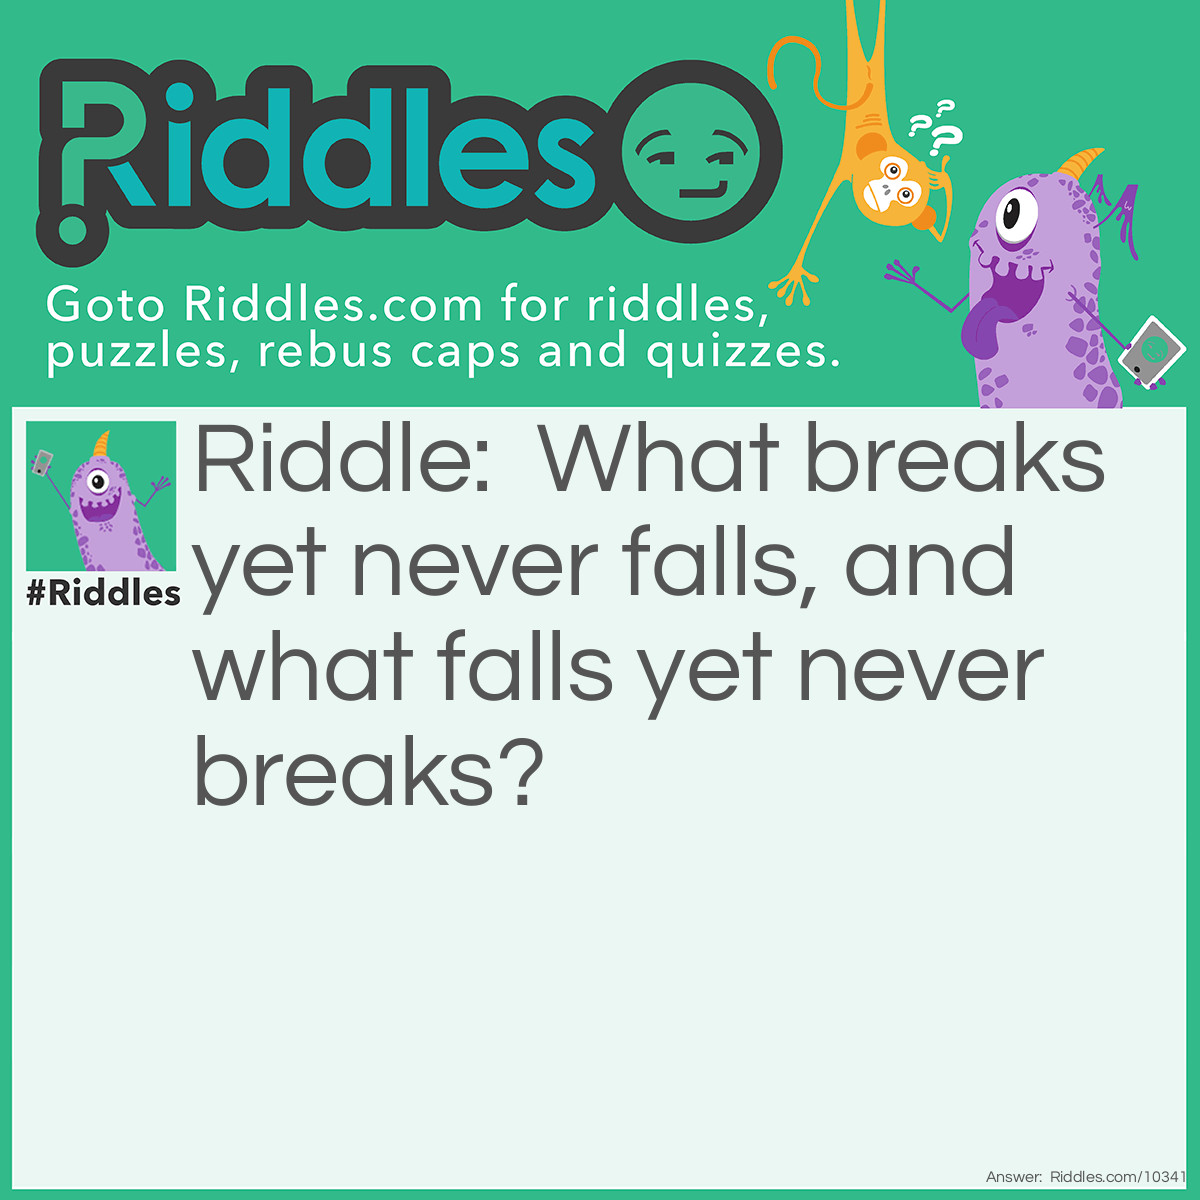 Riddle: What breaks yet never falls, and what falls yet never breaks? Answer: Day, and Night.